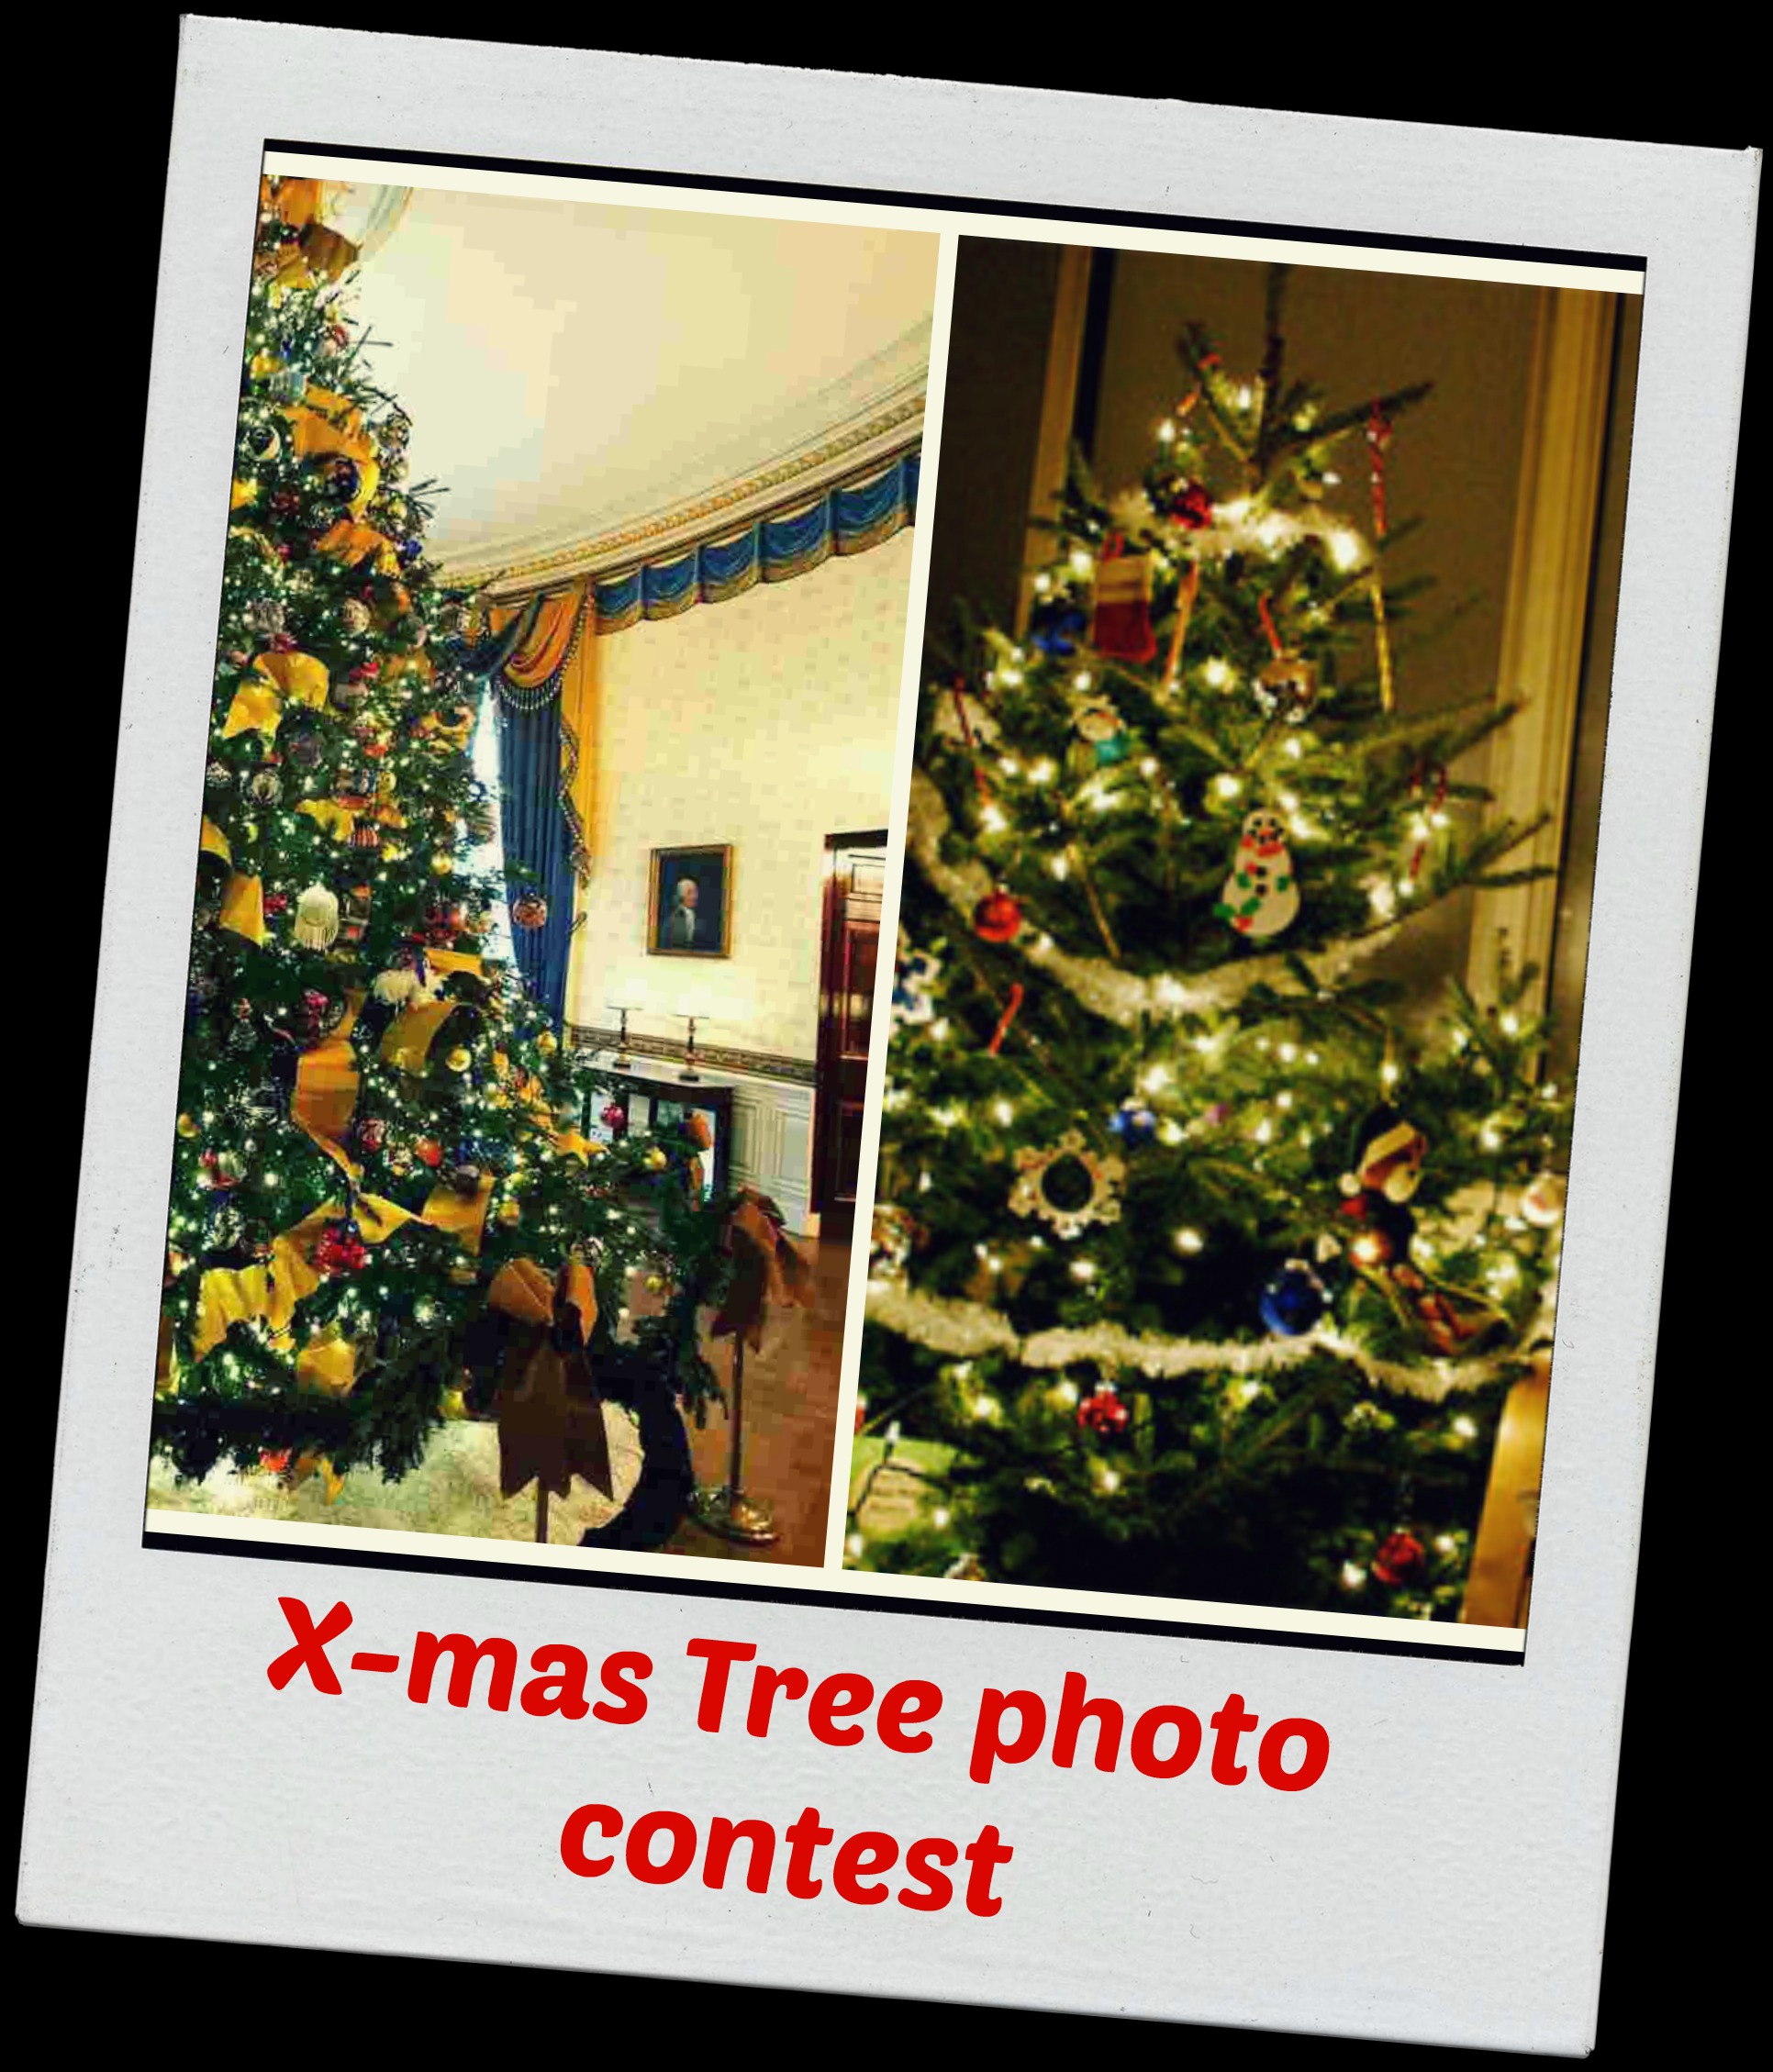 Christmas special:12 days of photo contest.